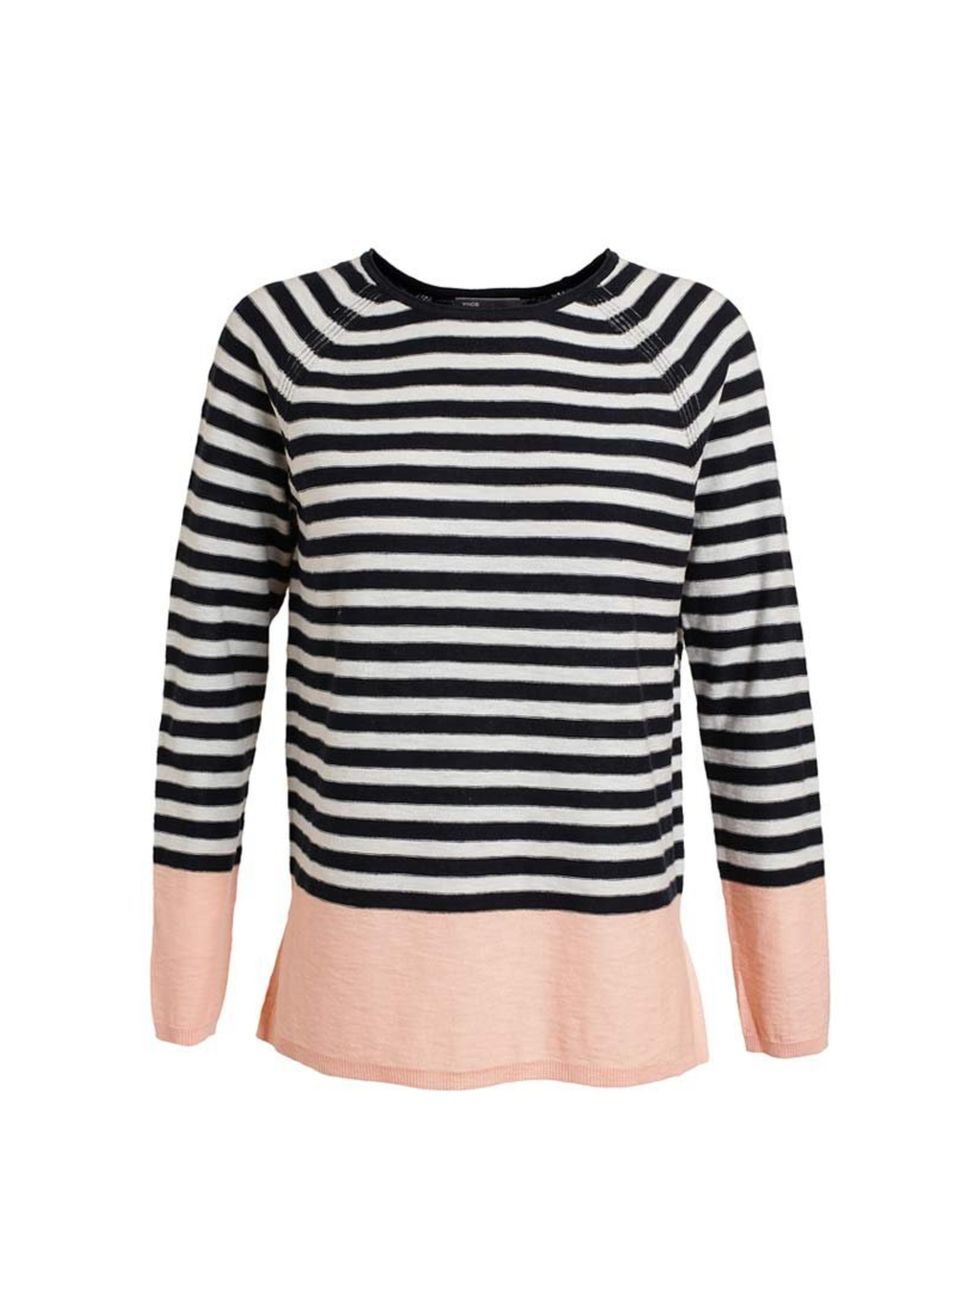 <p>Layering for the lazy. Ingenious.</p><p>Vince jumper, £140 at <a href="http://www.brownsfashion.com/product/01C823760005/194/striped-colour-blocked-raglan-cotton-jumper">Browns</a></p>